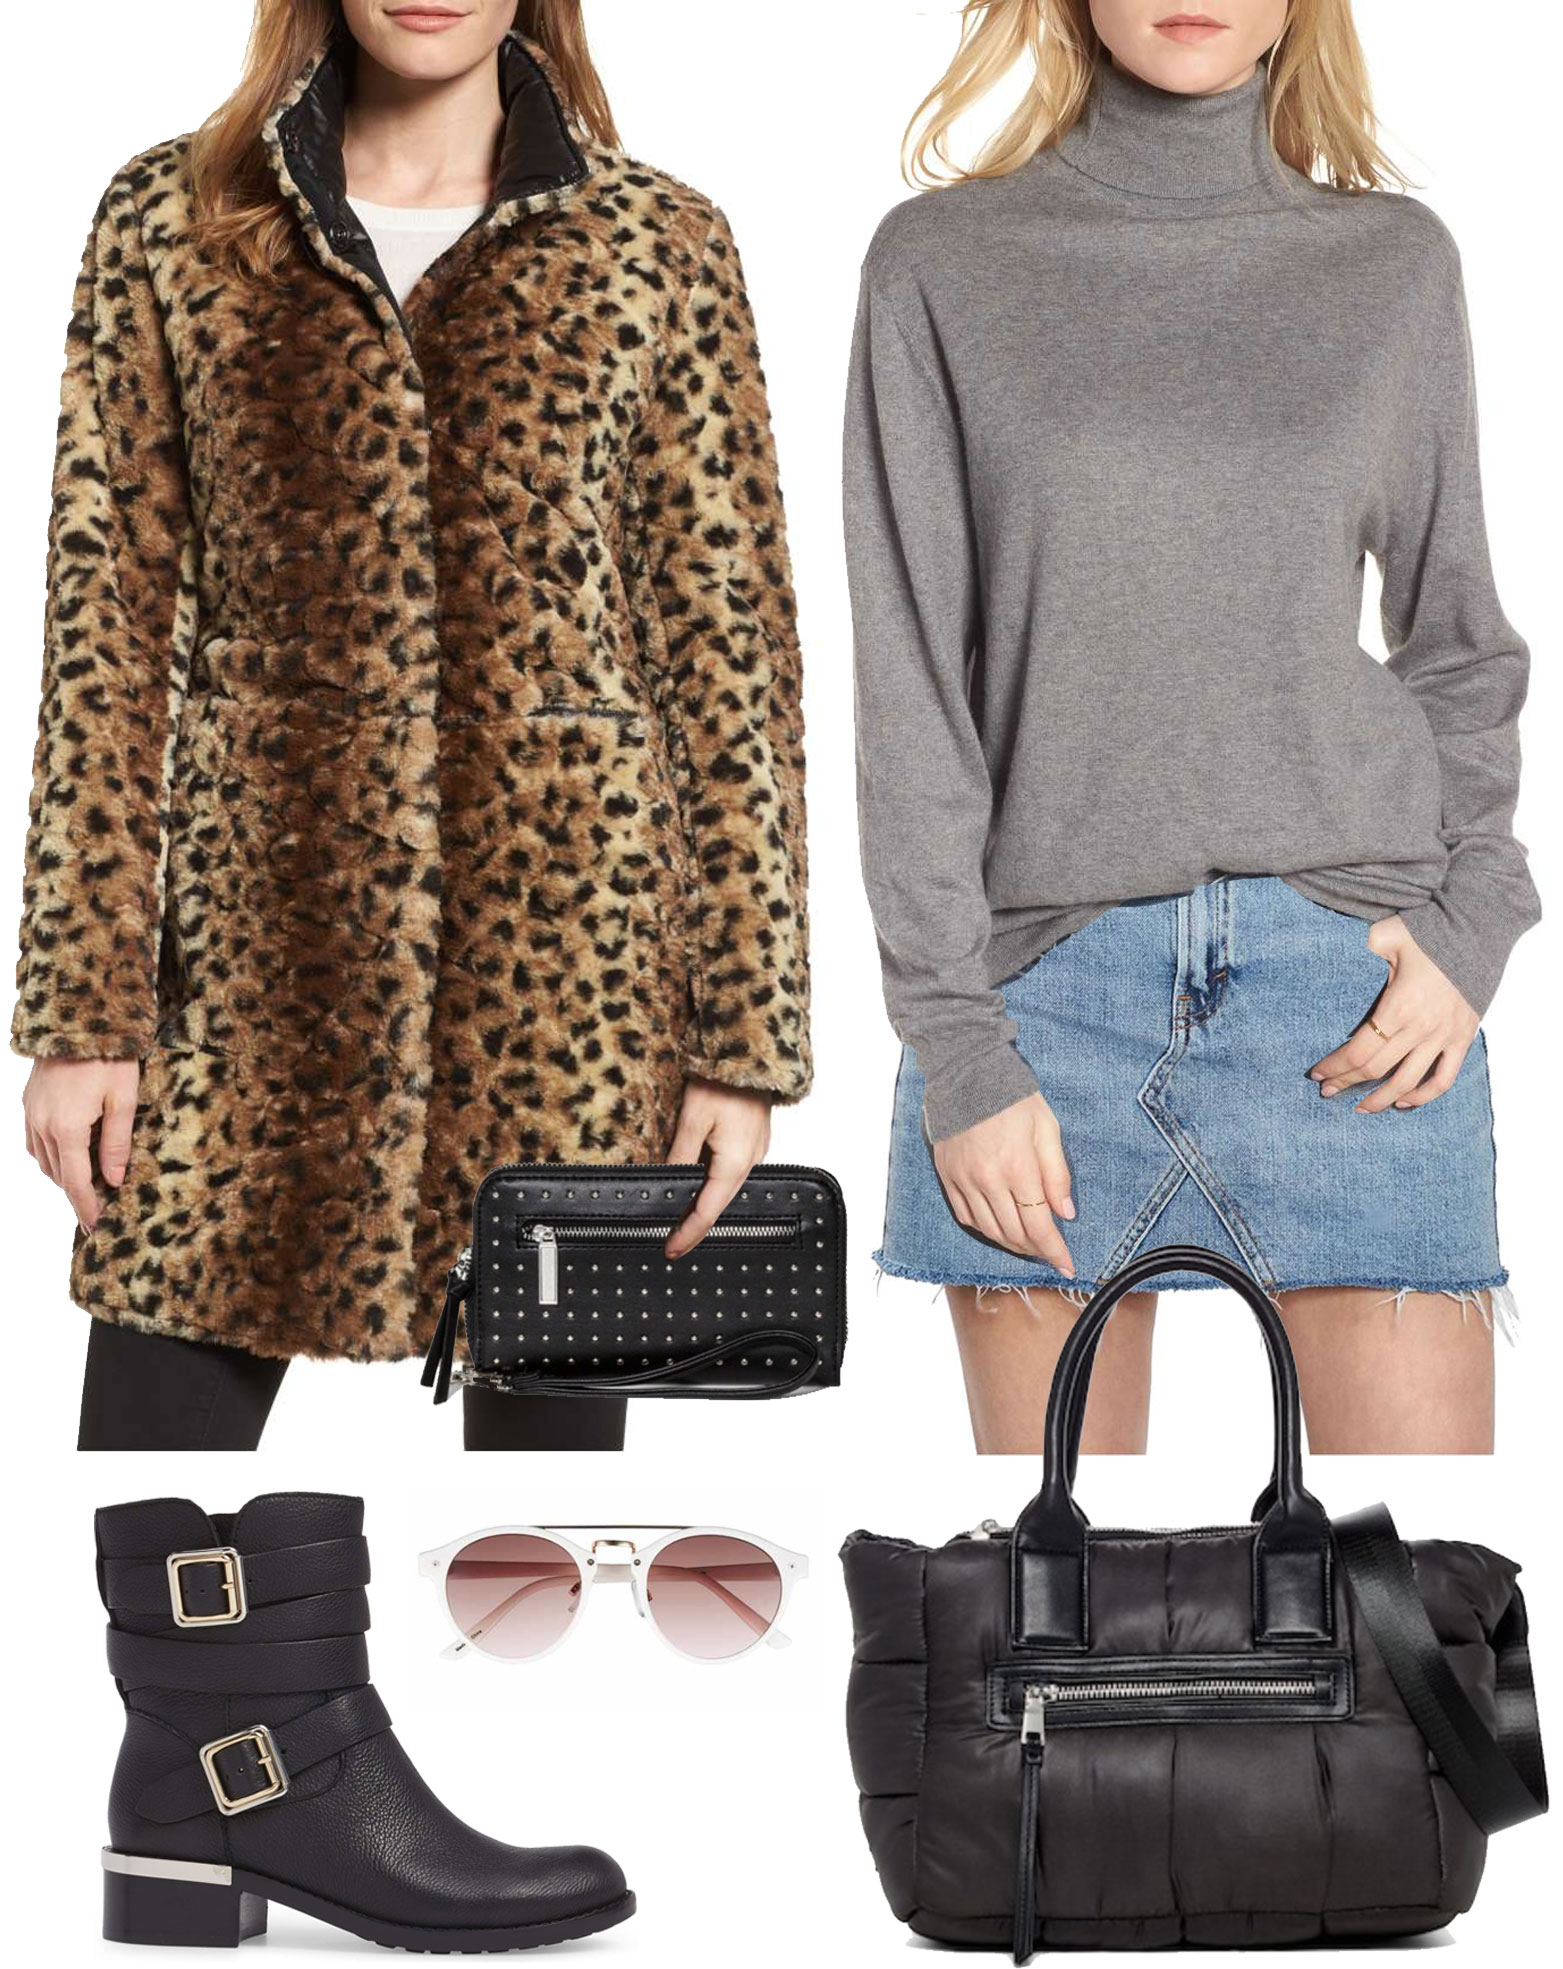 Gwen Stefani wears a leopard Vince Camuto coat with moto boots and a Chanel bag.